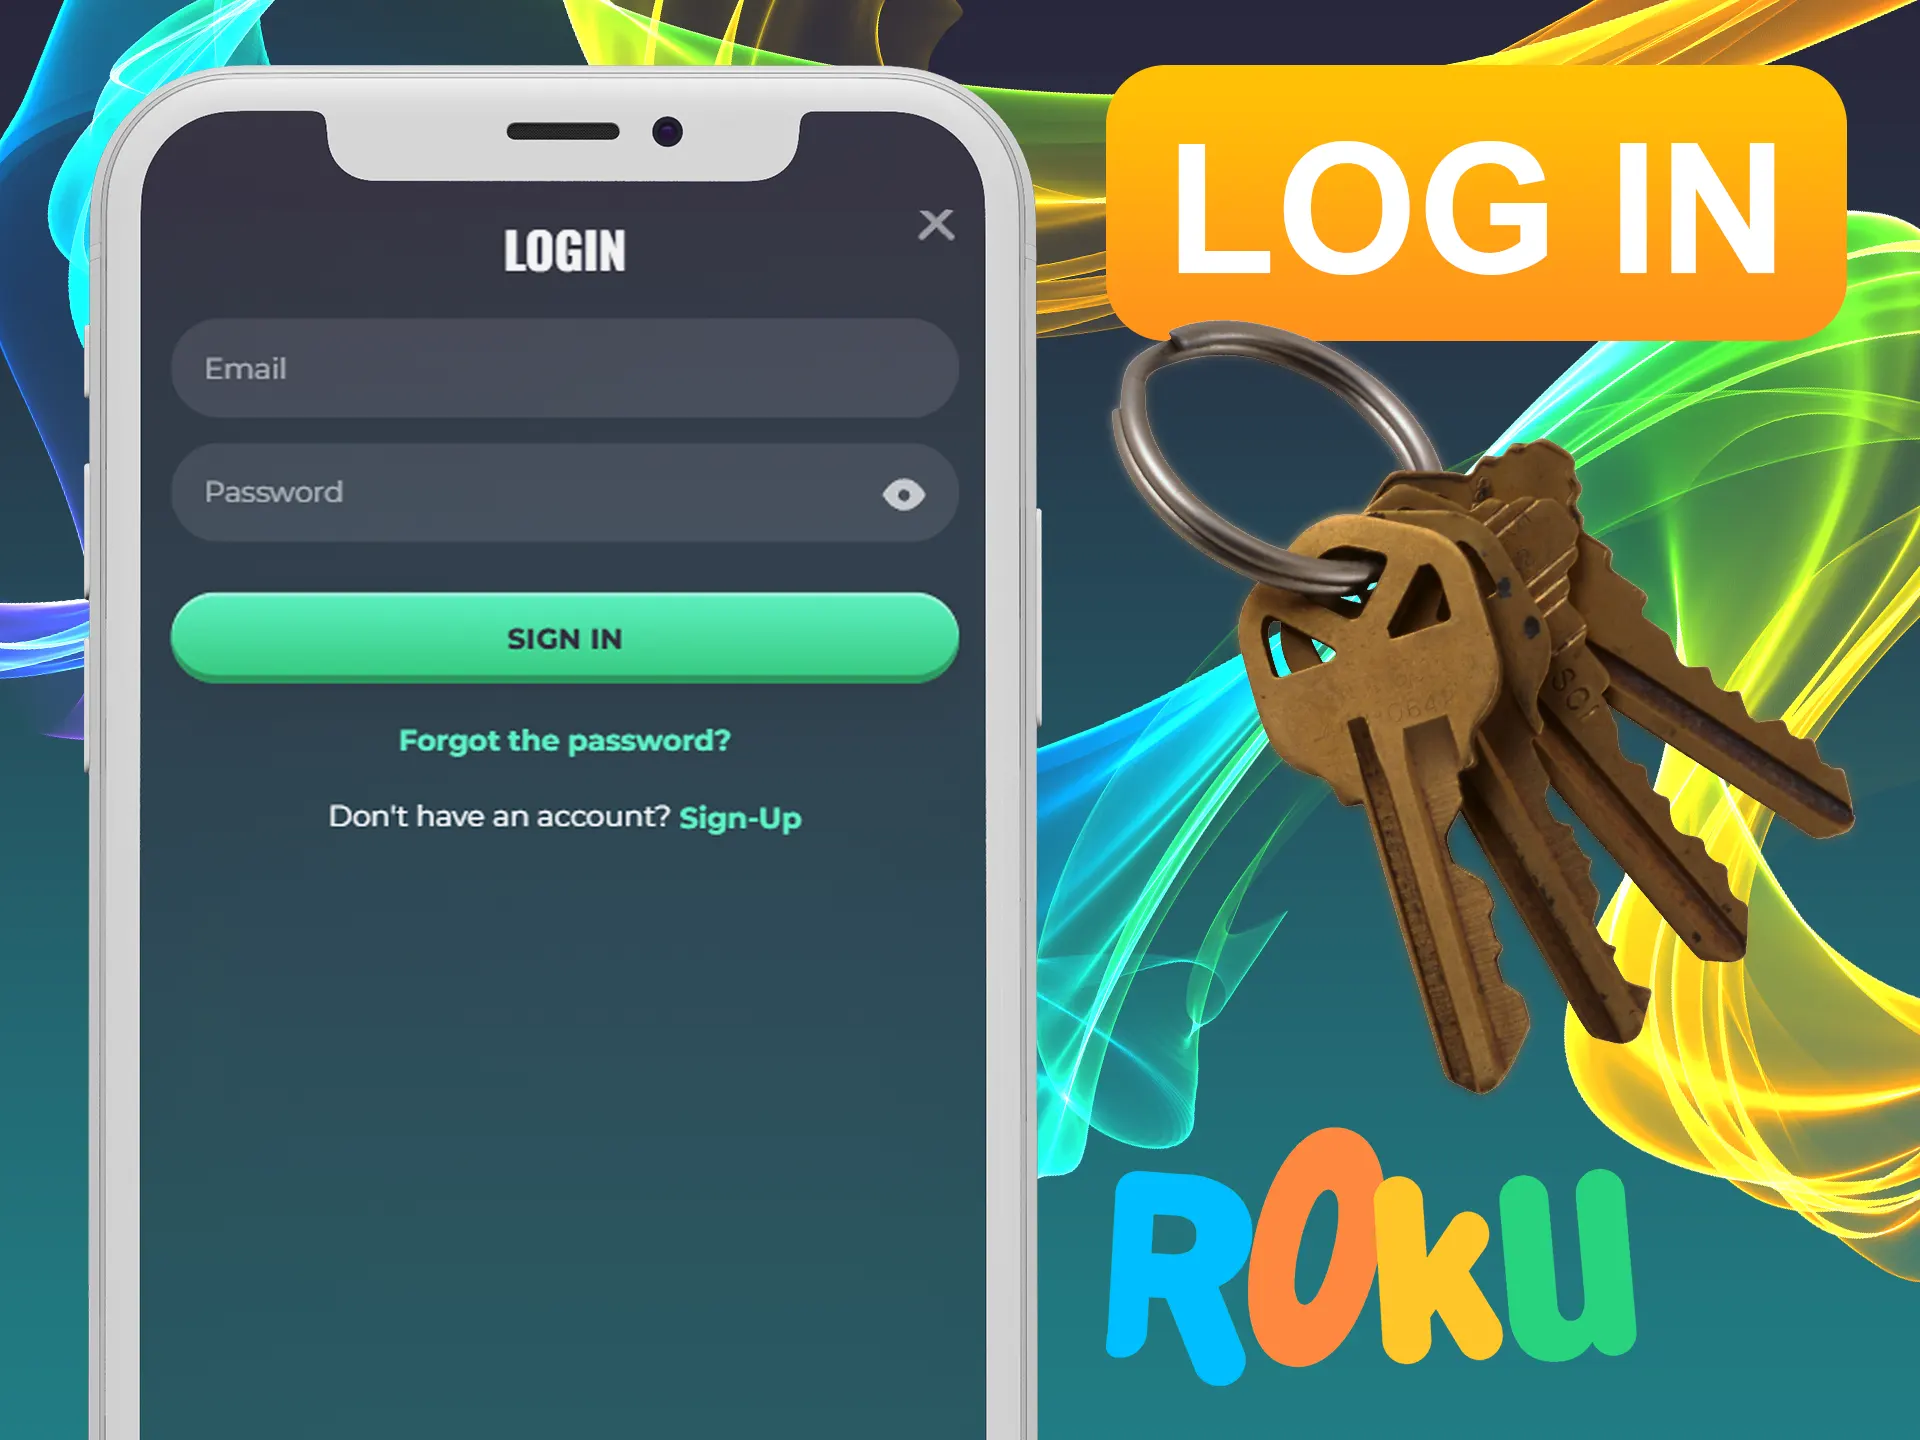 Use your Rokubet account for logging in.